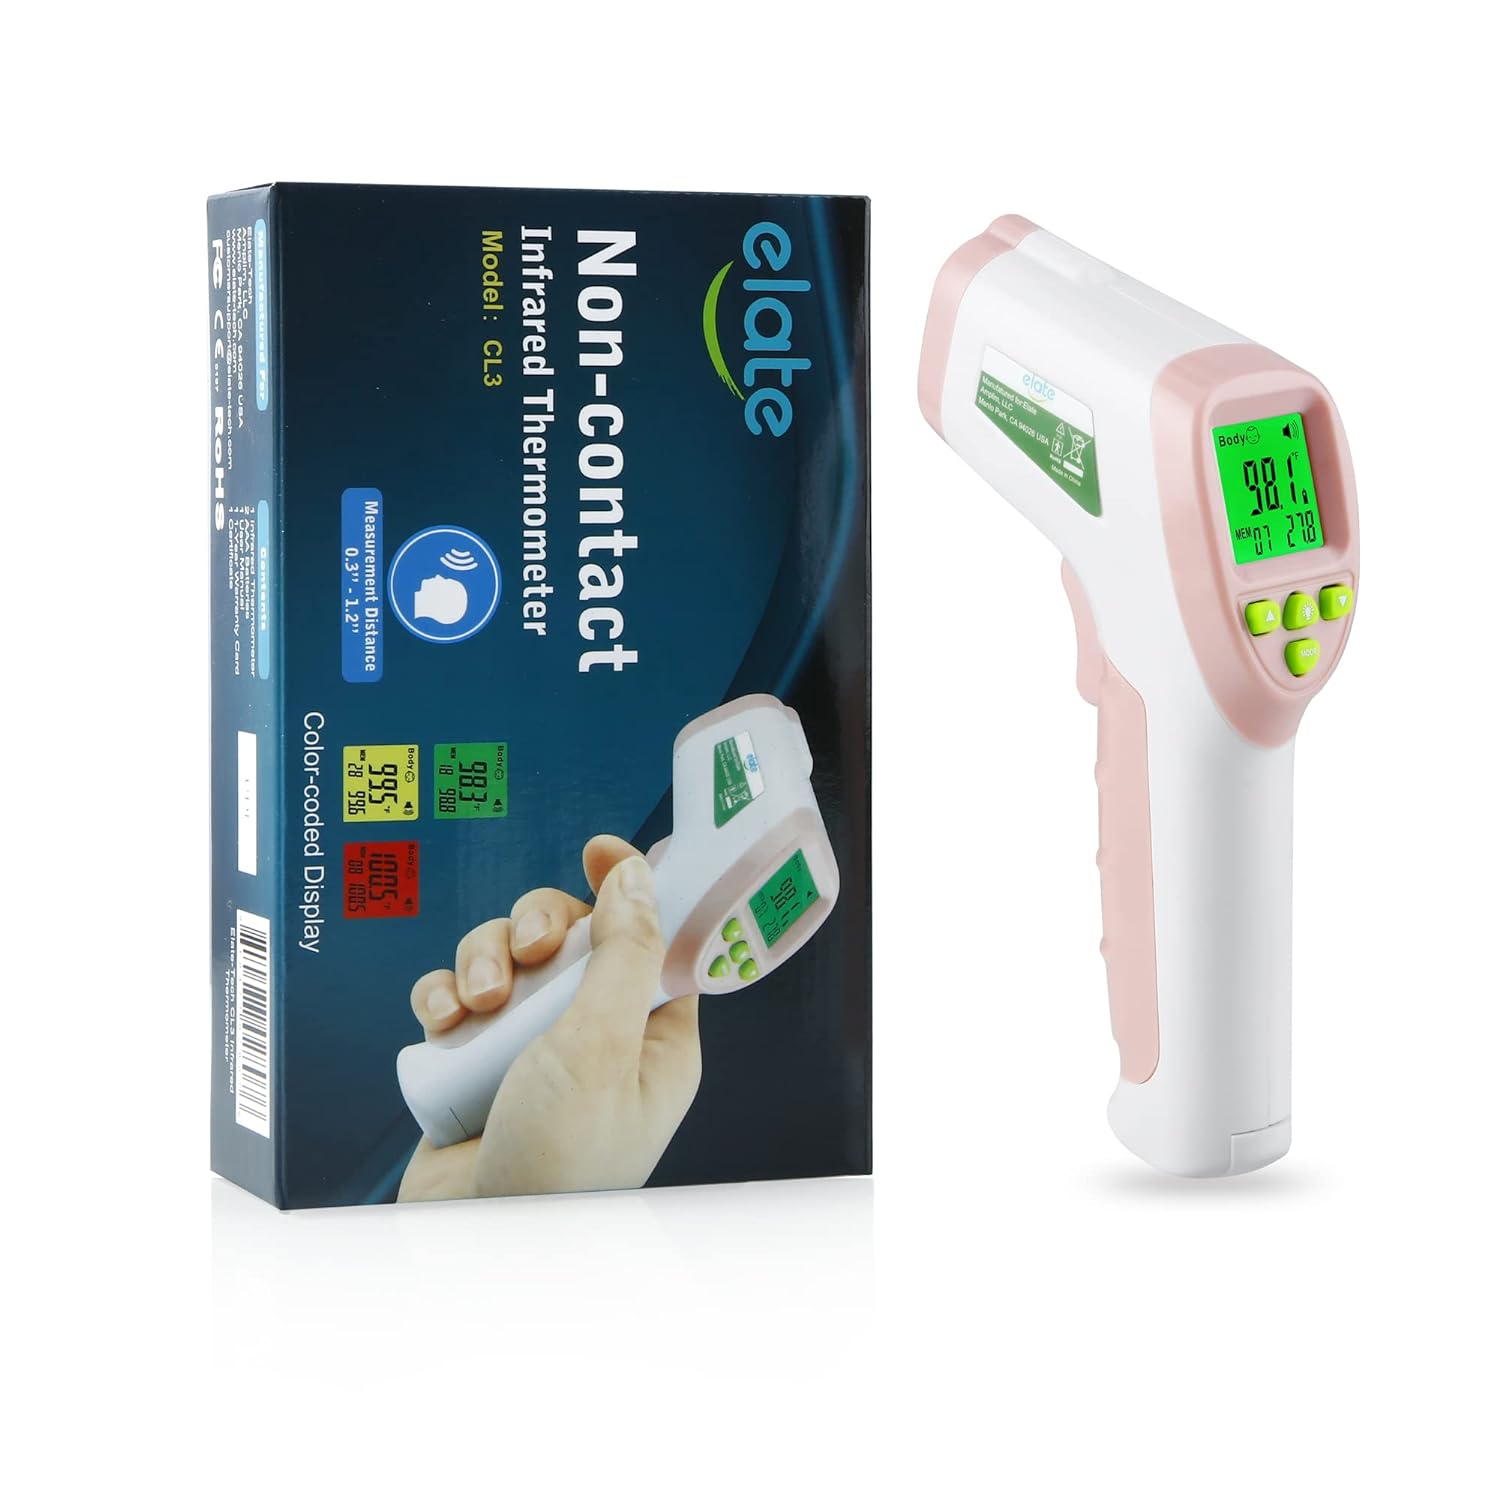 Elate No Touch Forehead Thermometer - Non-Contact Baby Temporal Thermometer - Medical Grade, Hygienic, Accurate, Instant Read Touchless Fever Thermometer for Adults and Kids - FSA HSA - Pink